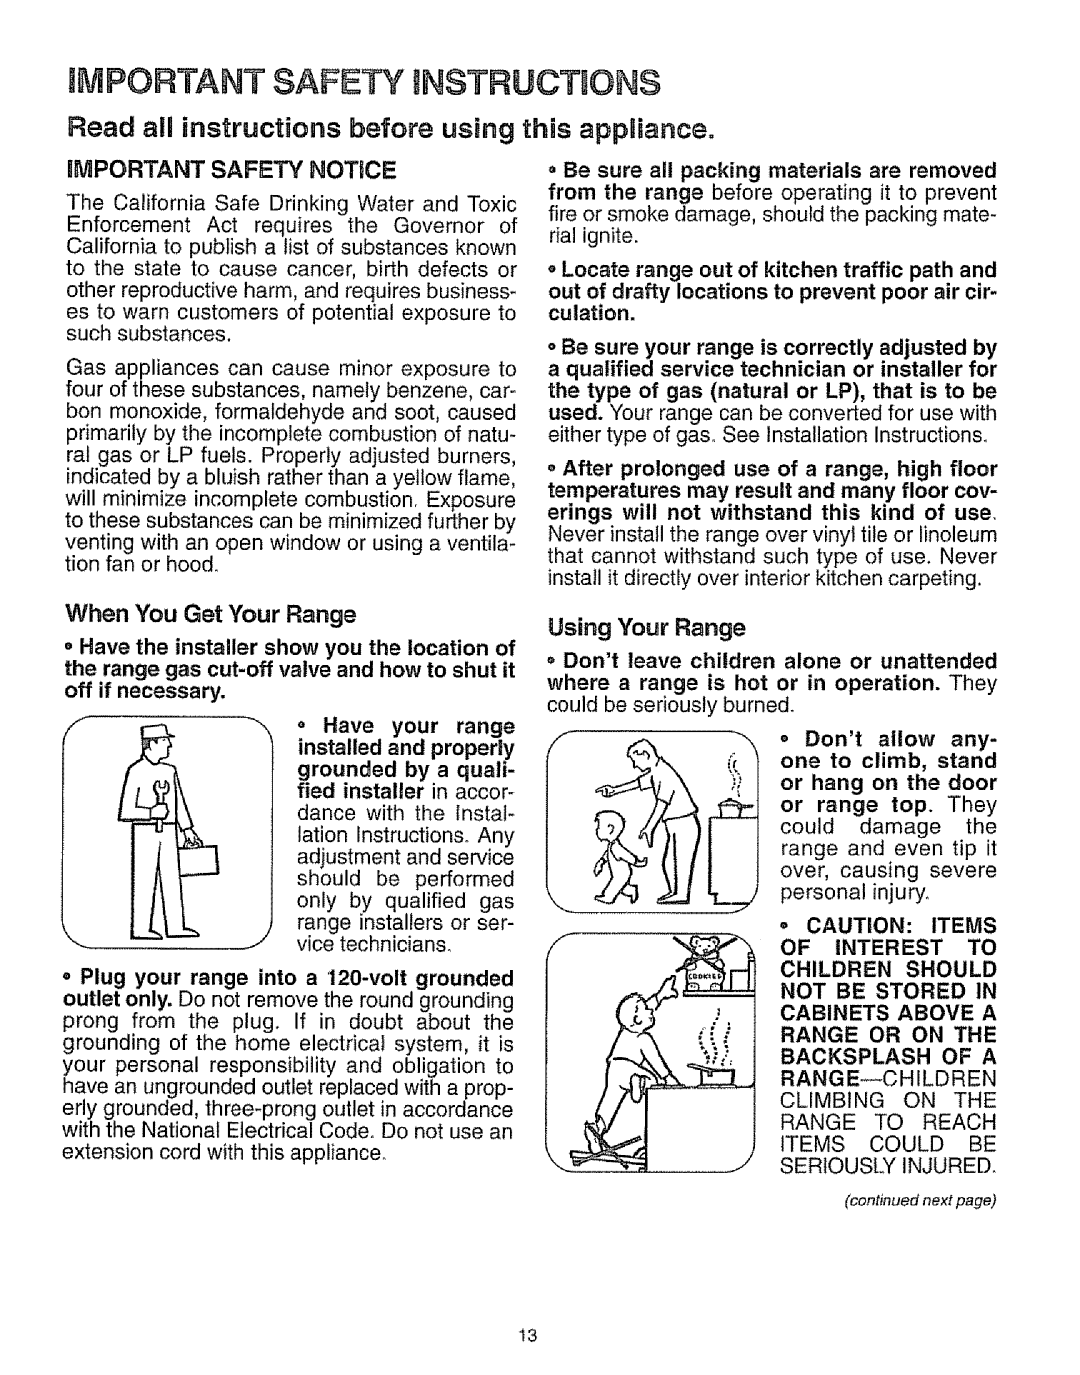 Sears 73318 iMPORTANT SAFETY mNSTRUCTBONS, Read all instructions before using this appliance, Important Safety Notice 